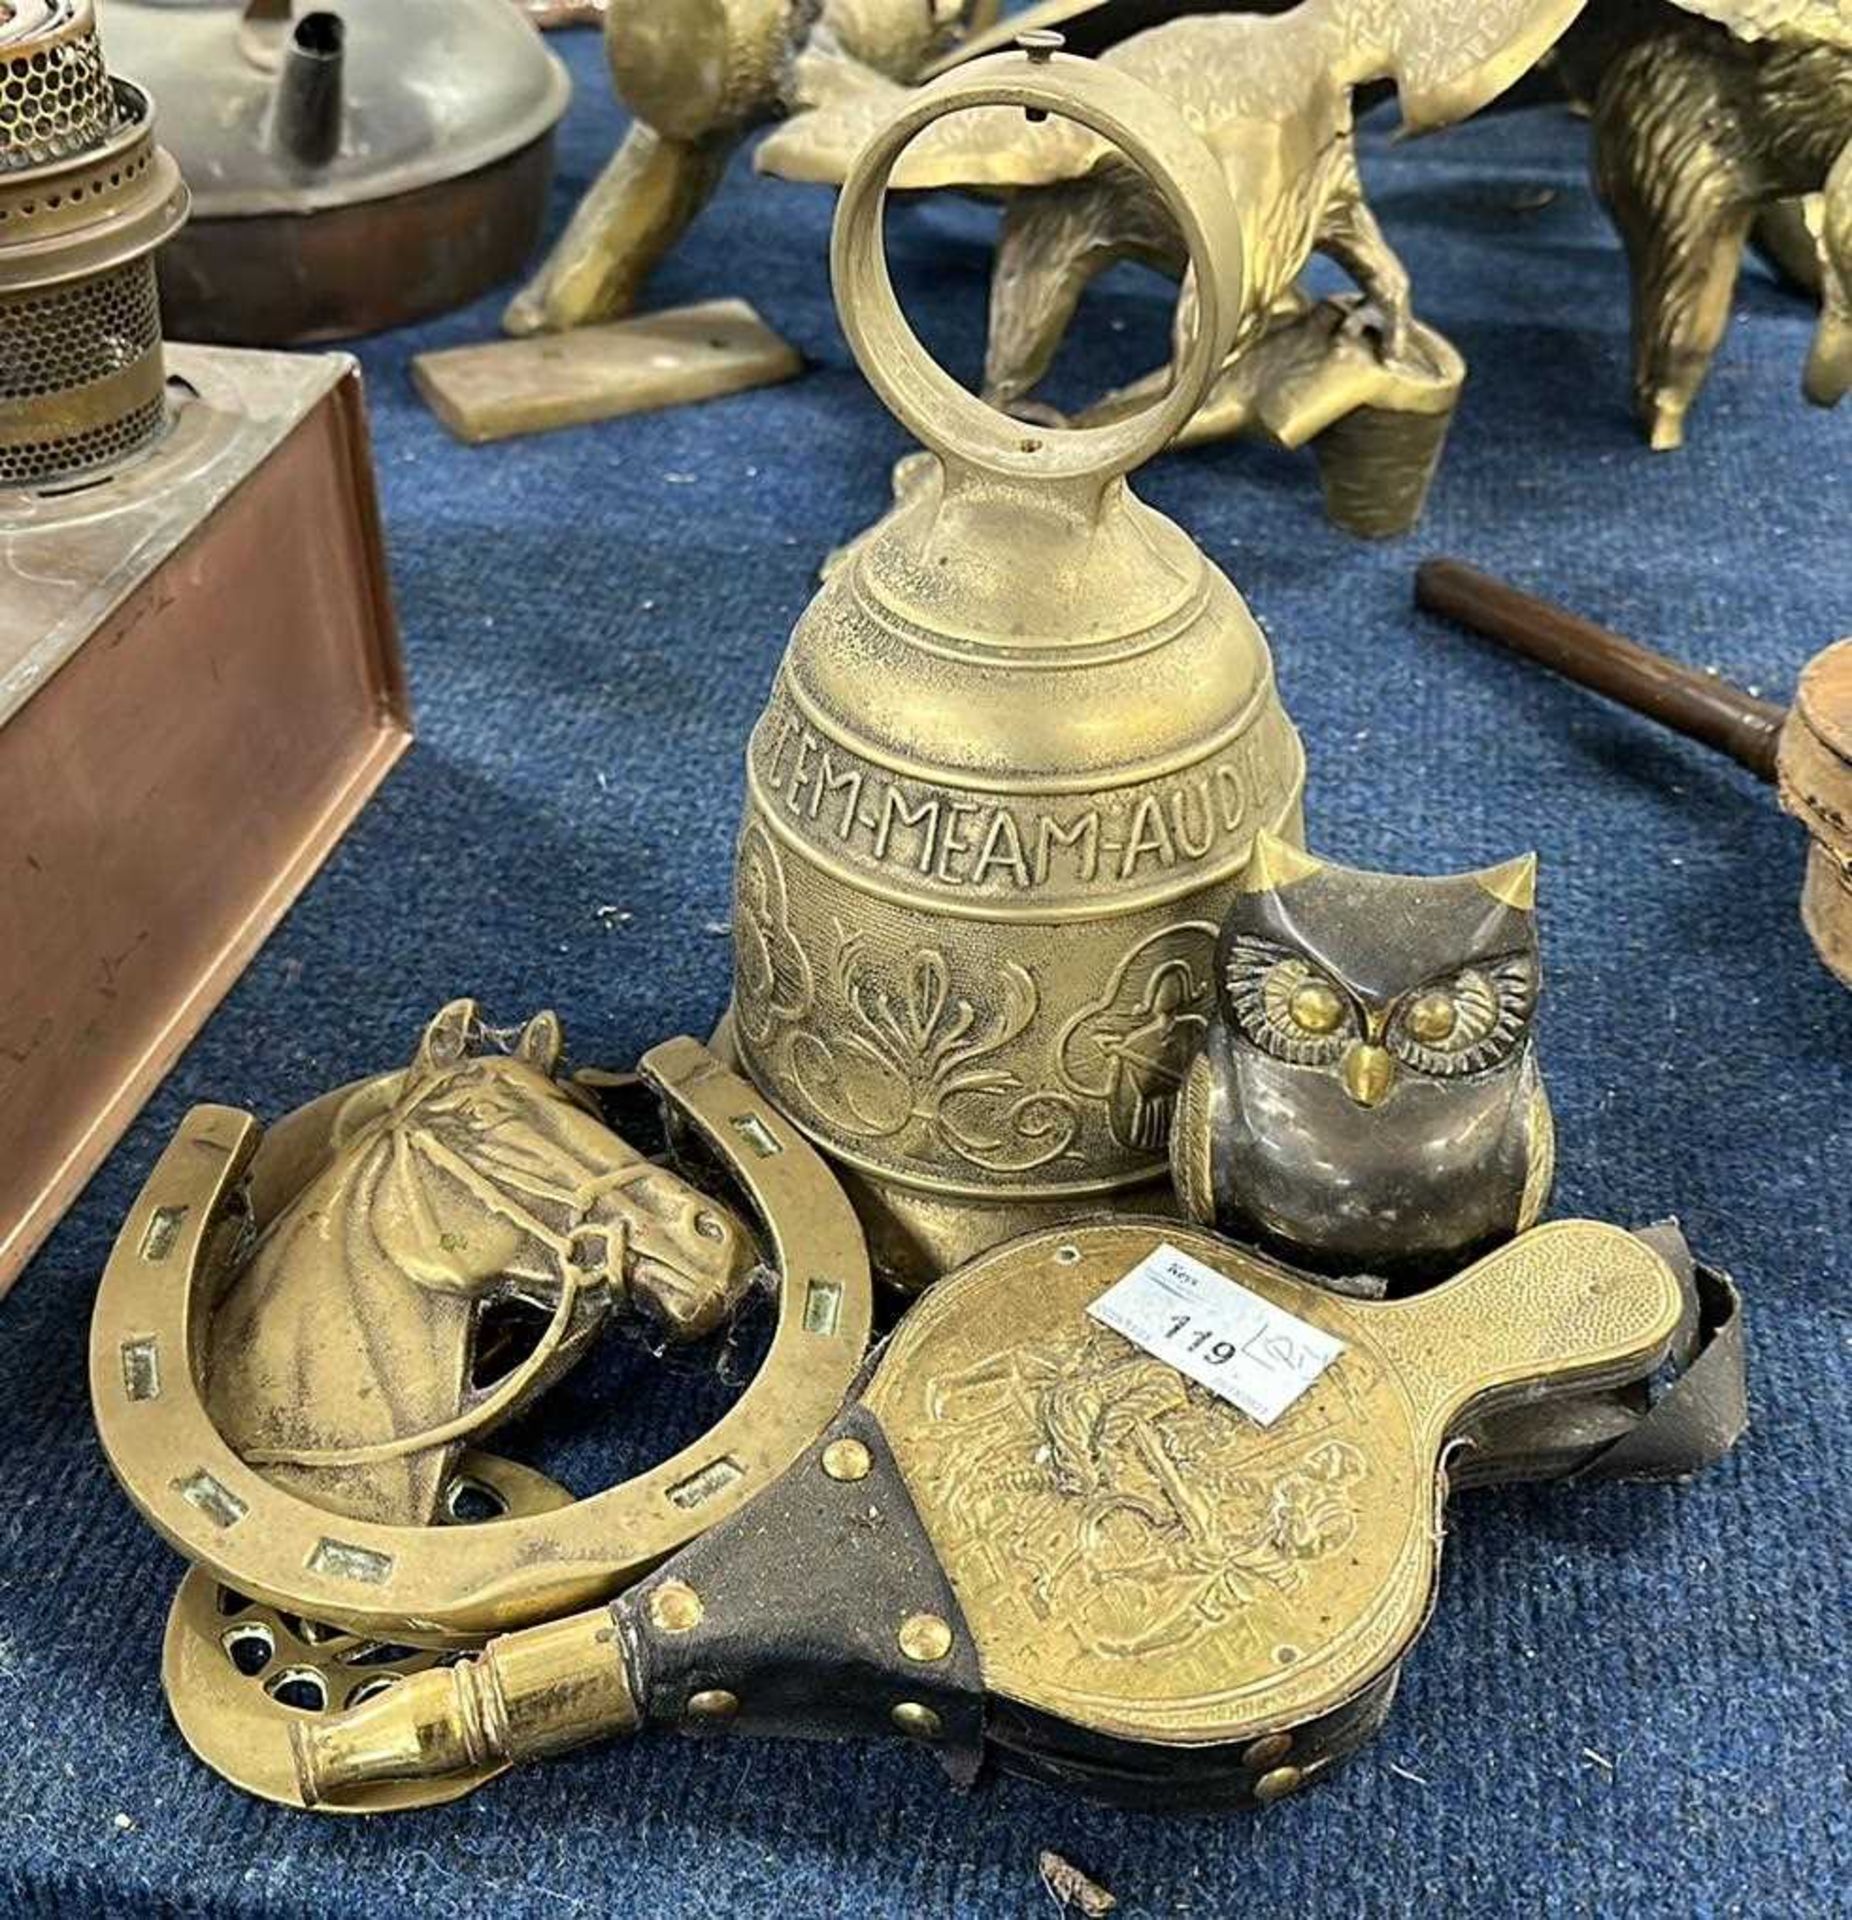 Mixed Lot: Brass bell, miniature brass mounted bellows, a horseshoe door knocker and other items - Image 4 of 4